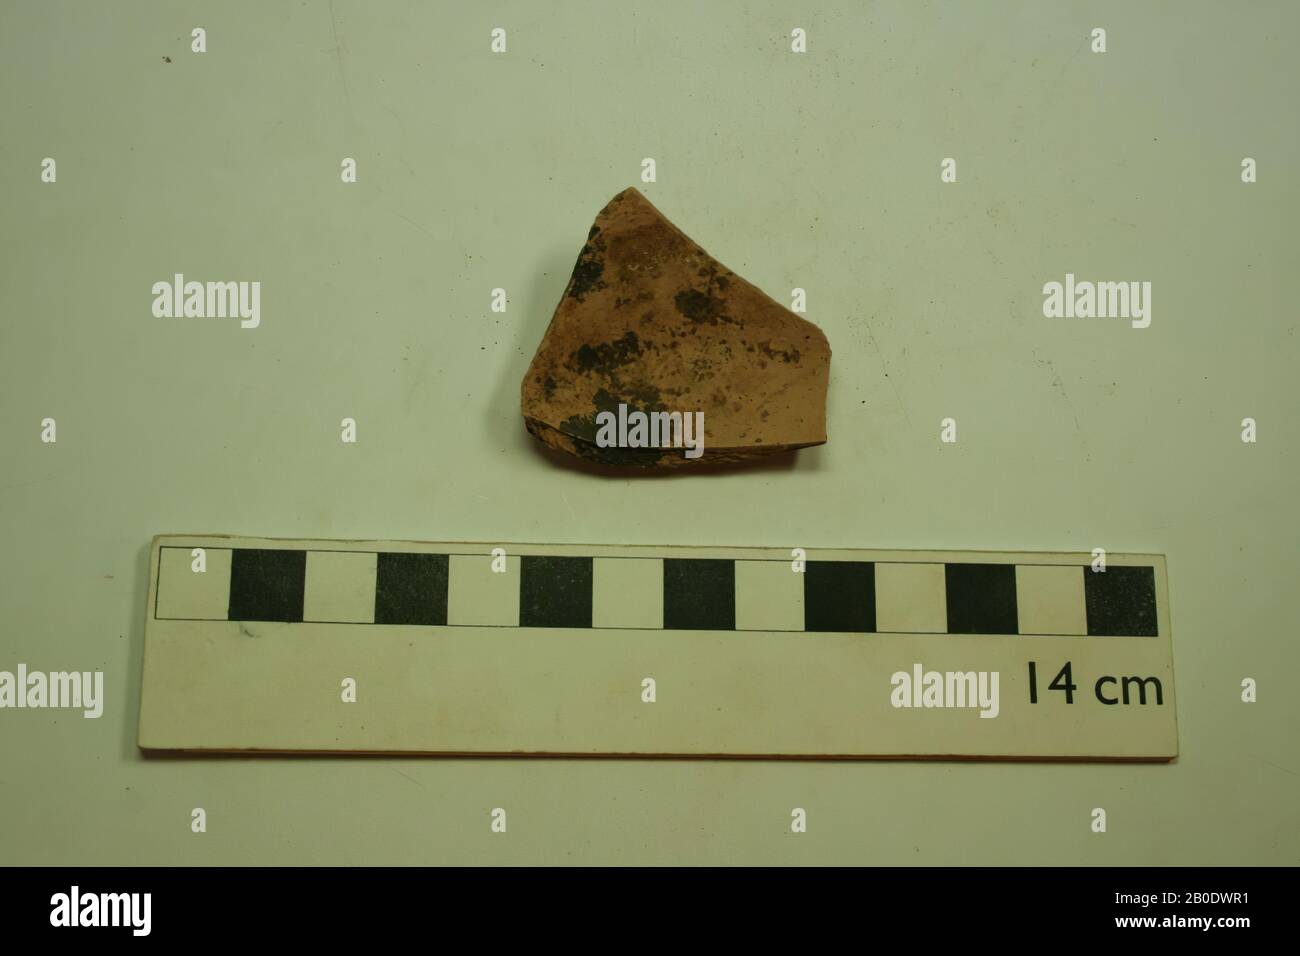 Egypt, shard, earthenware, 5 x 4.5 cm, Meroitic Period, 2nd-4th century A.D, Egypt Stock Photo